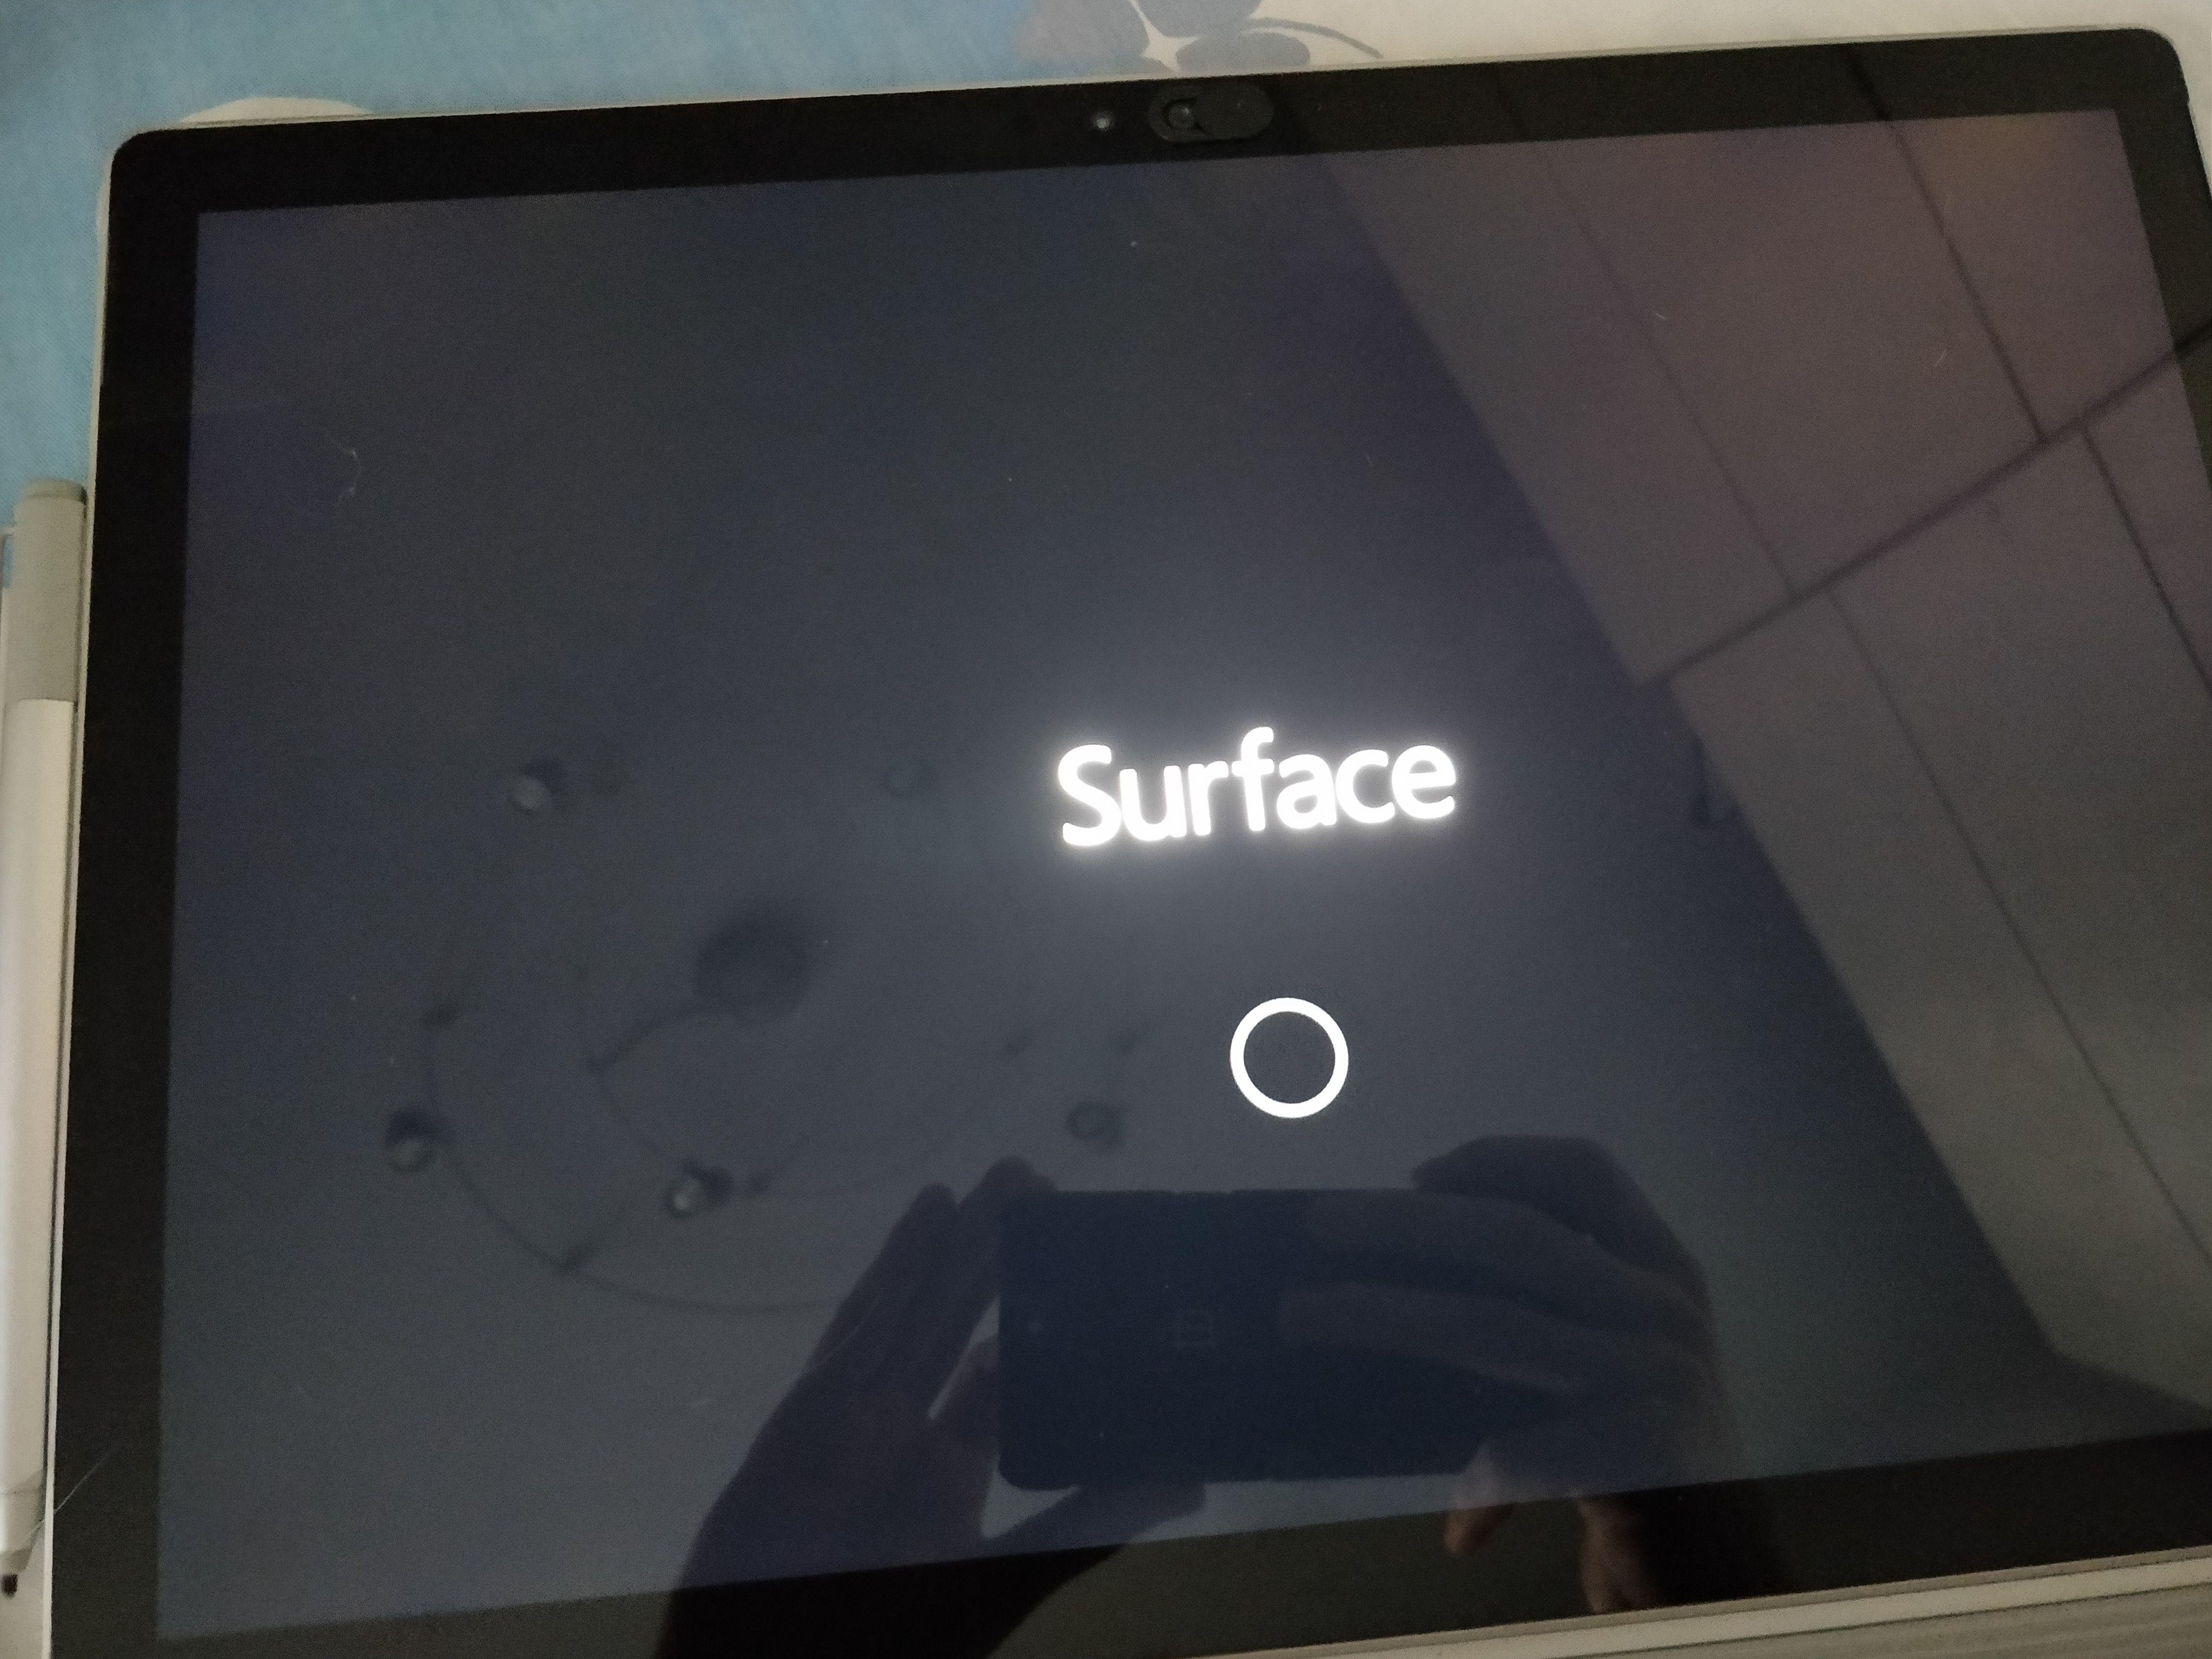 Official Microsoft Surface Logo - Surface stuck on boot screen after KB4100347 update